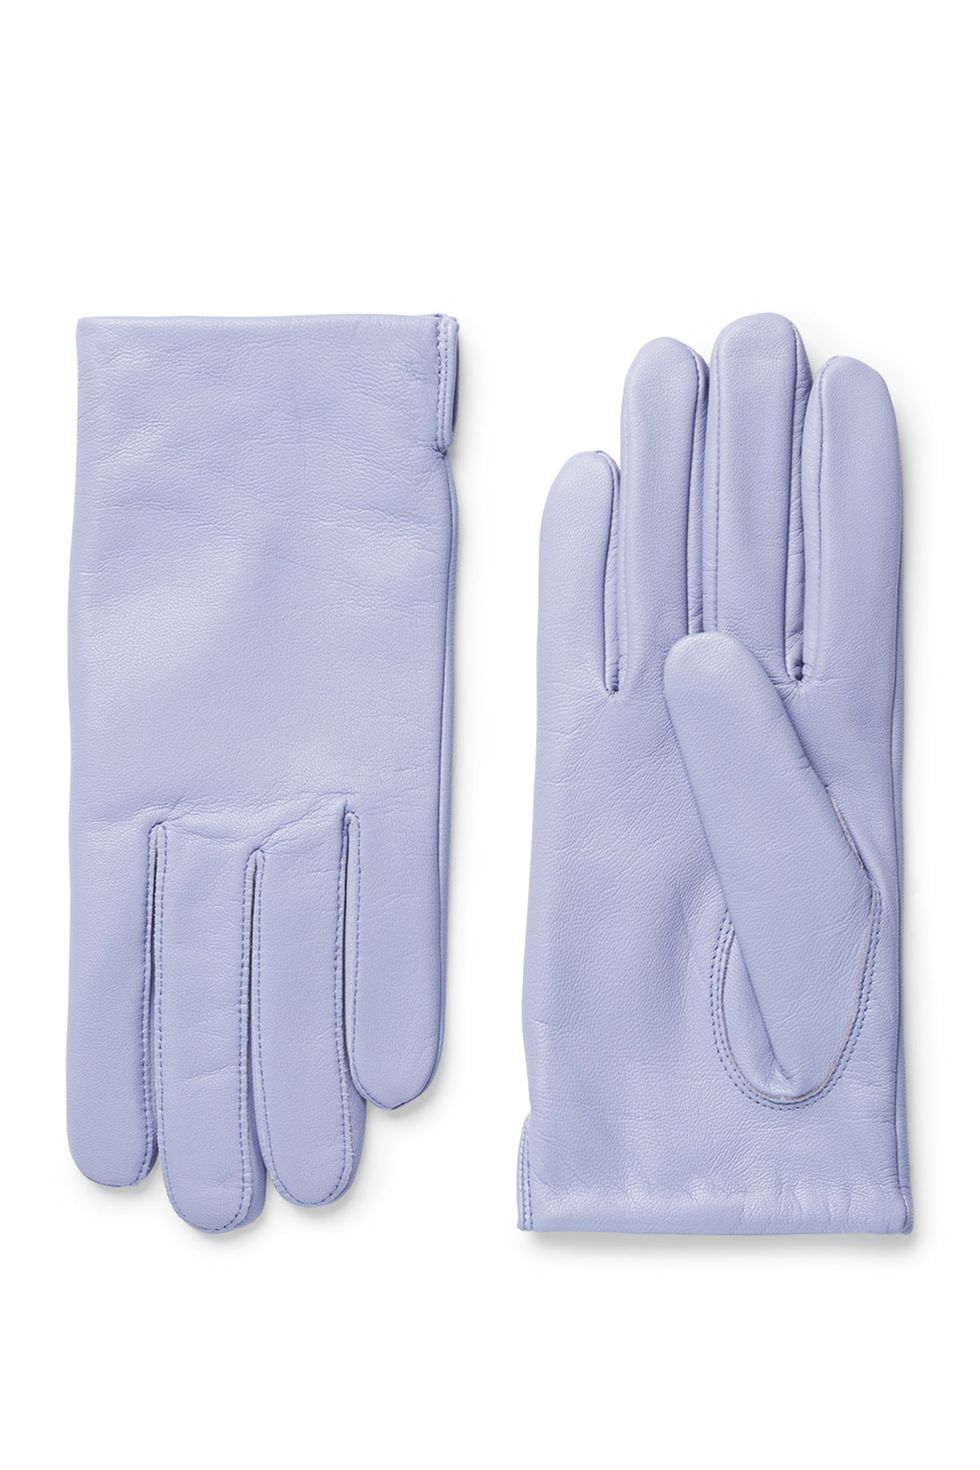 Safety glove, Glove, Personal protective equipment, Fashion accessory, Golf glove, Hand, Formal gloves, Sports gear, Finger, Leather, 